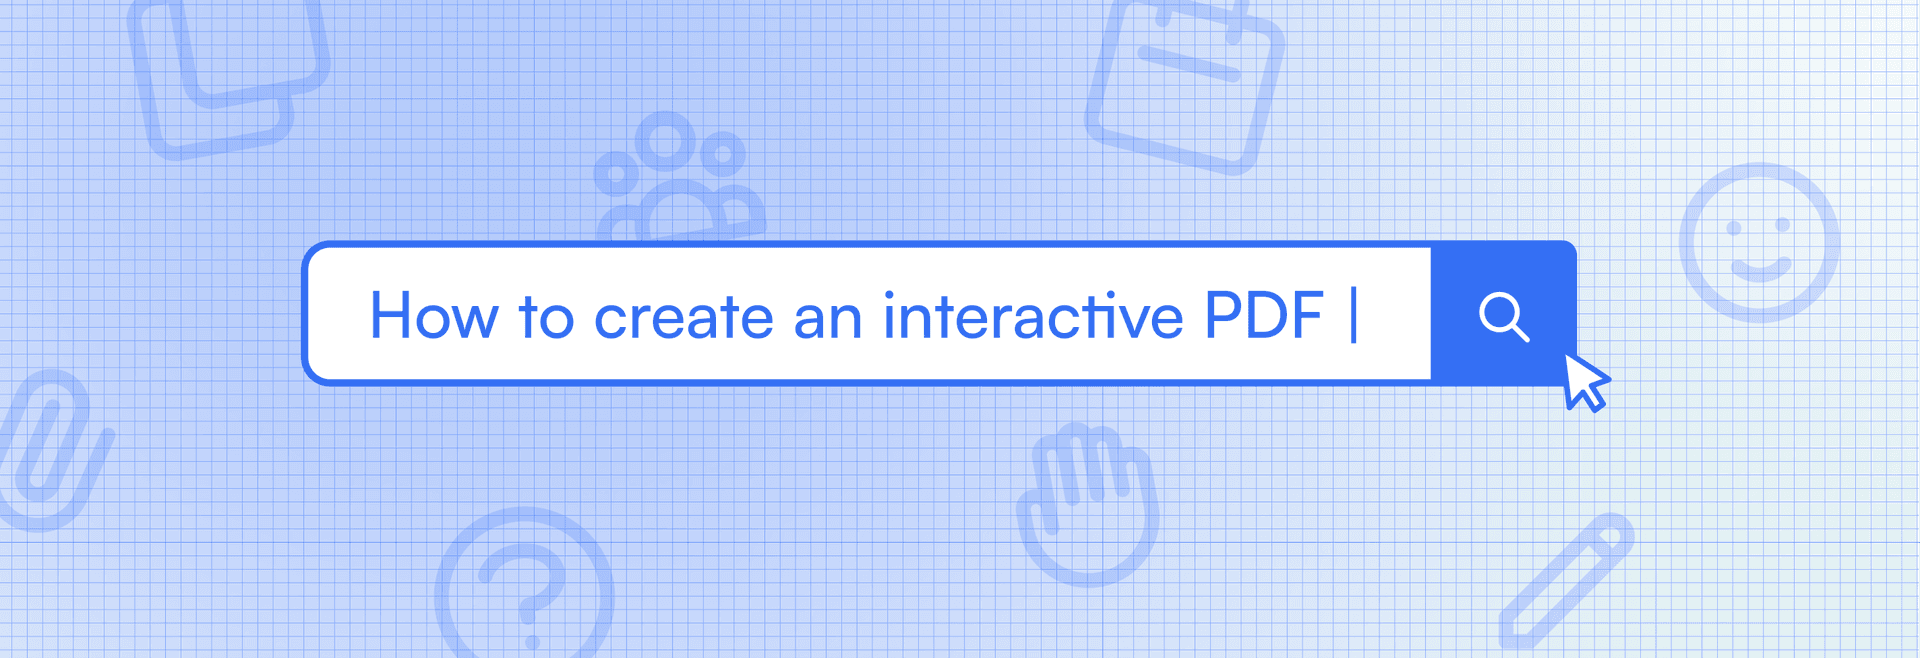 How to create an interactive PDF: A simple guide